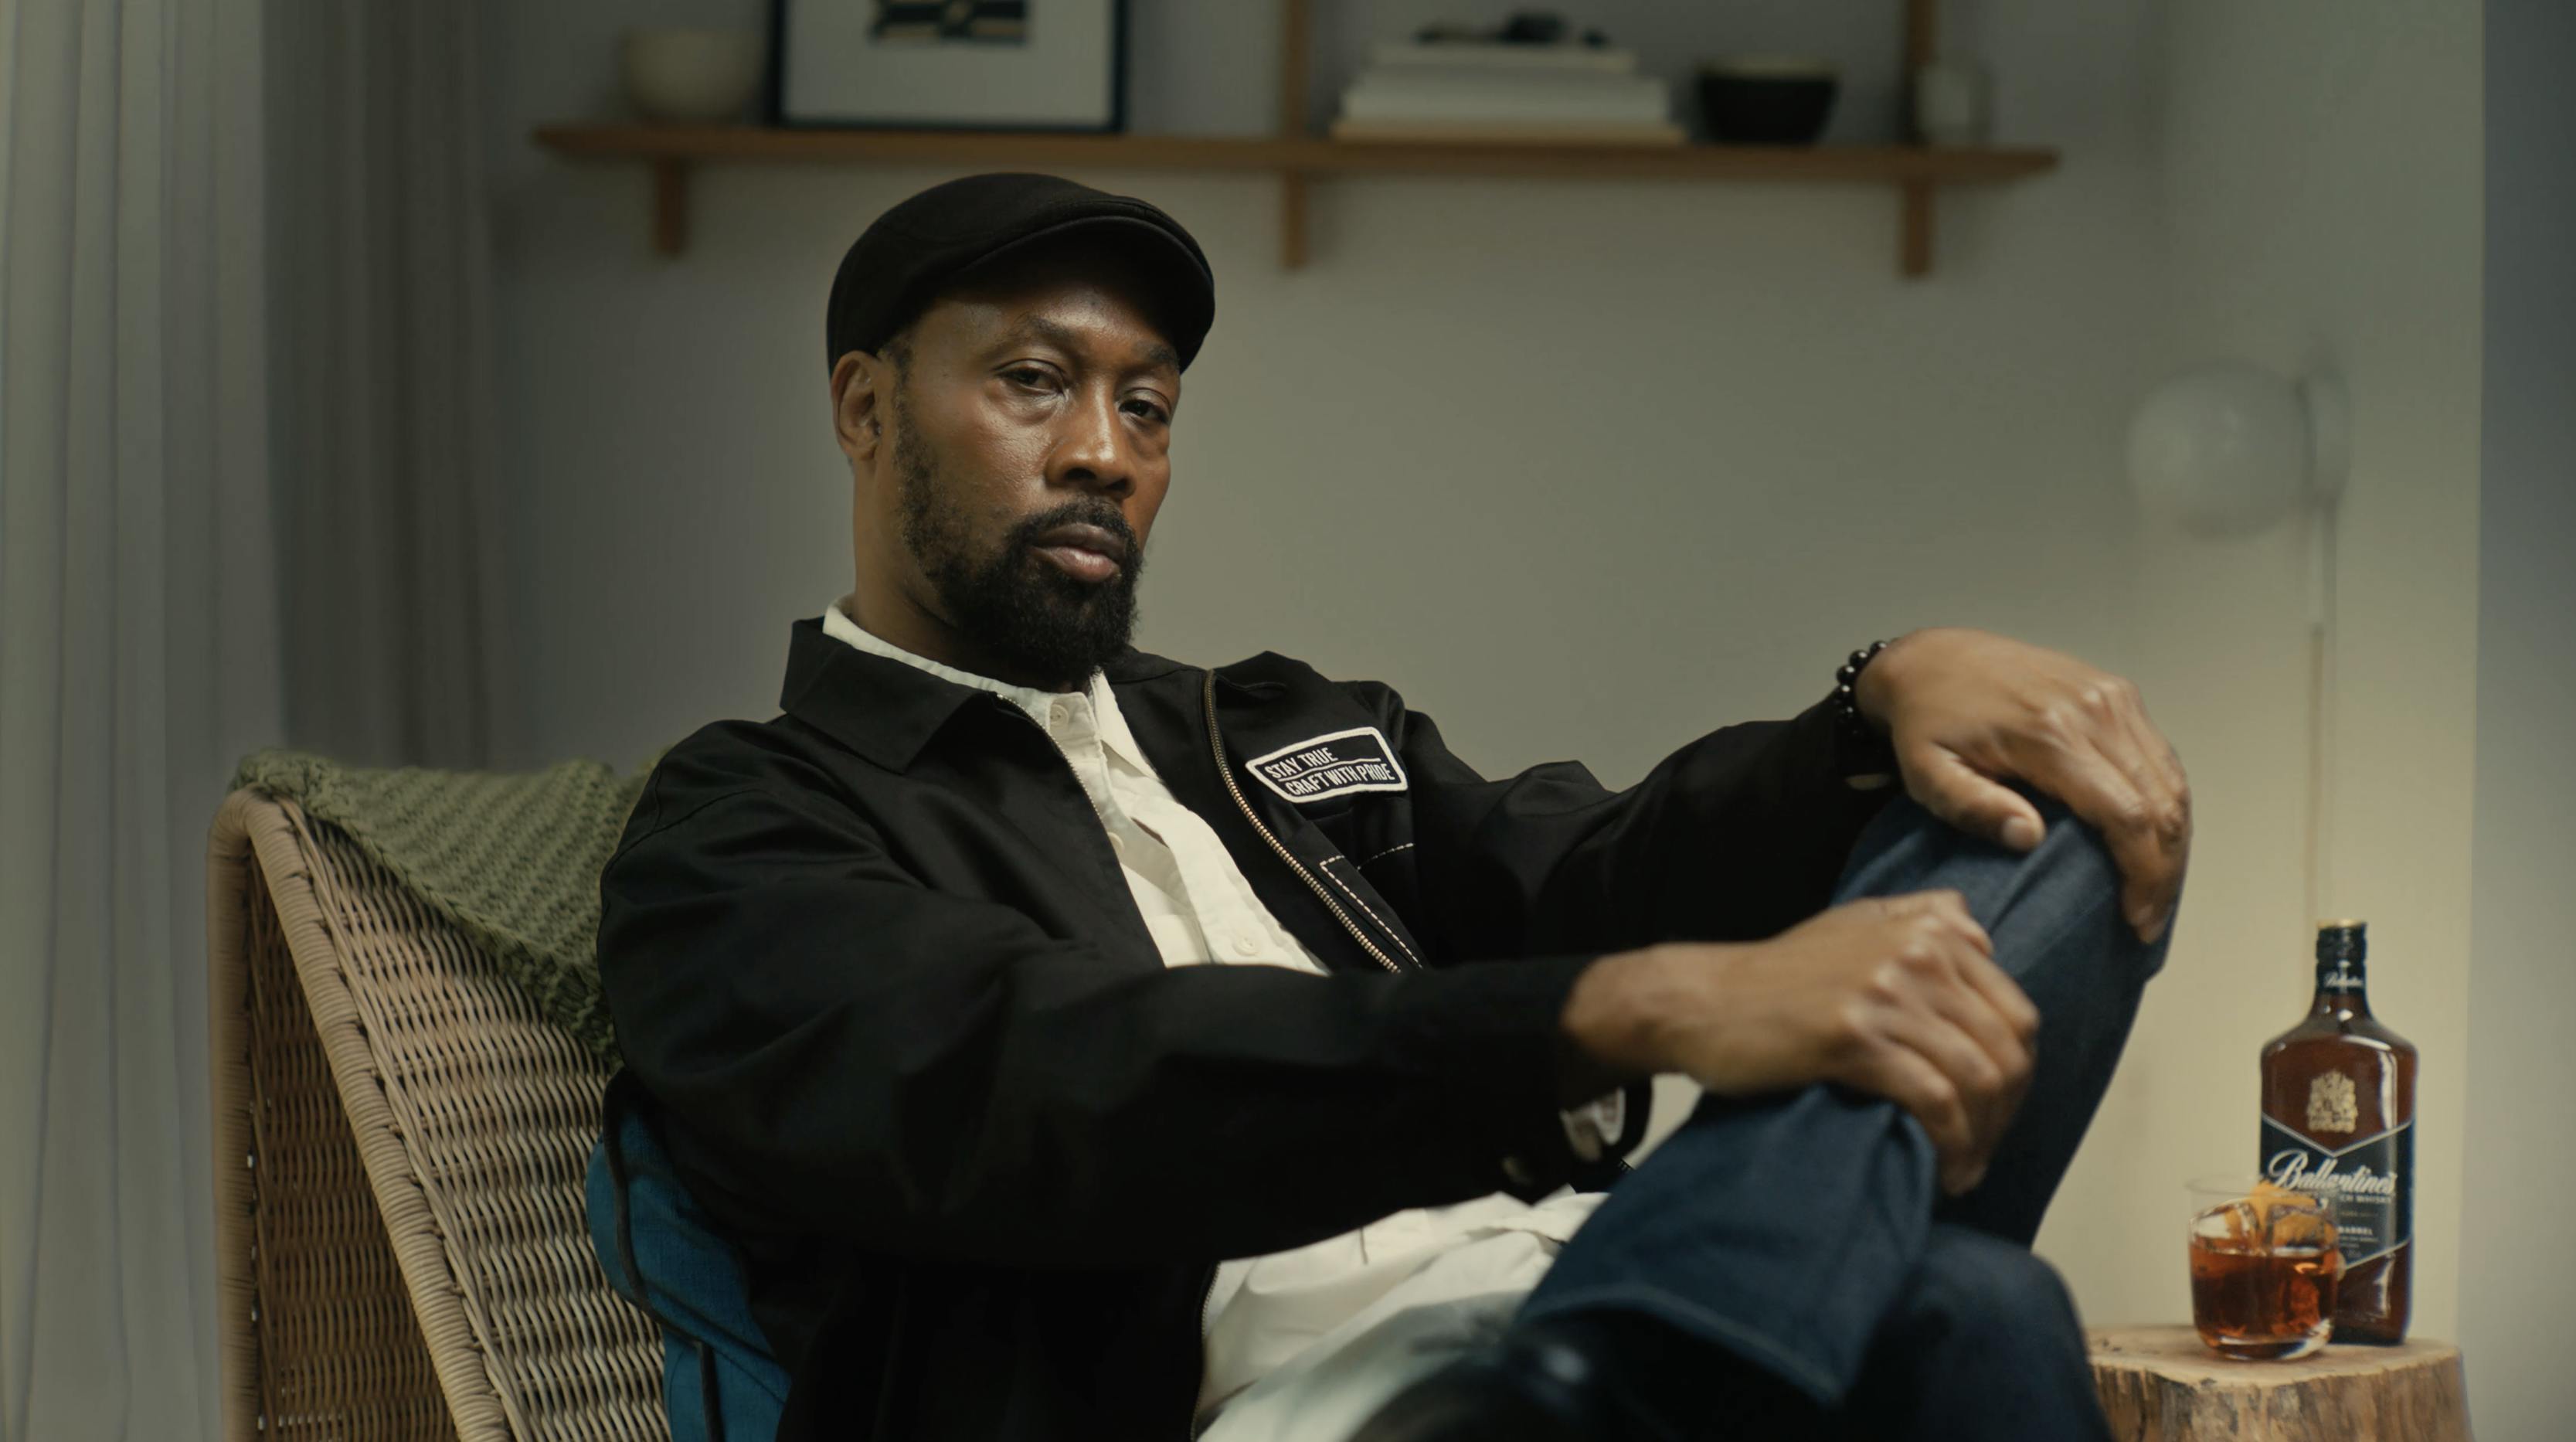 A man (RZA) sits next to a glass of Ballantine's whiskey